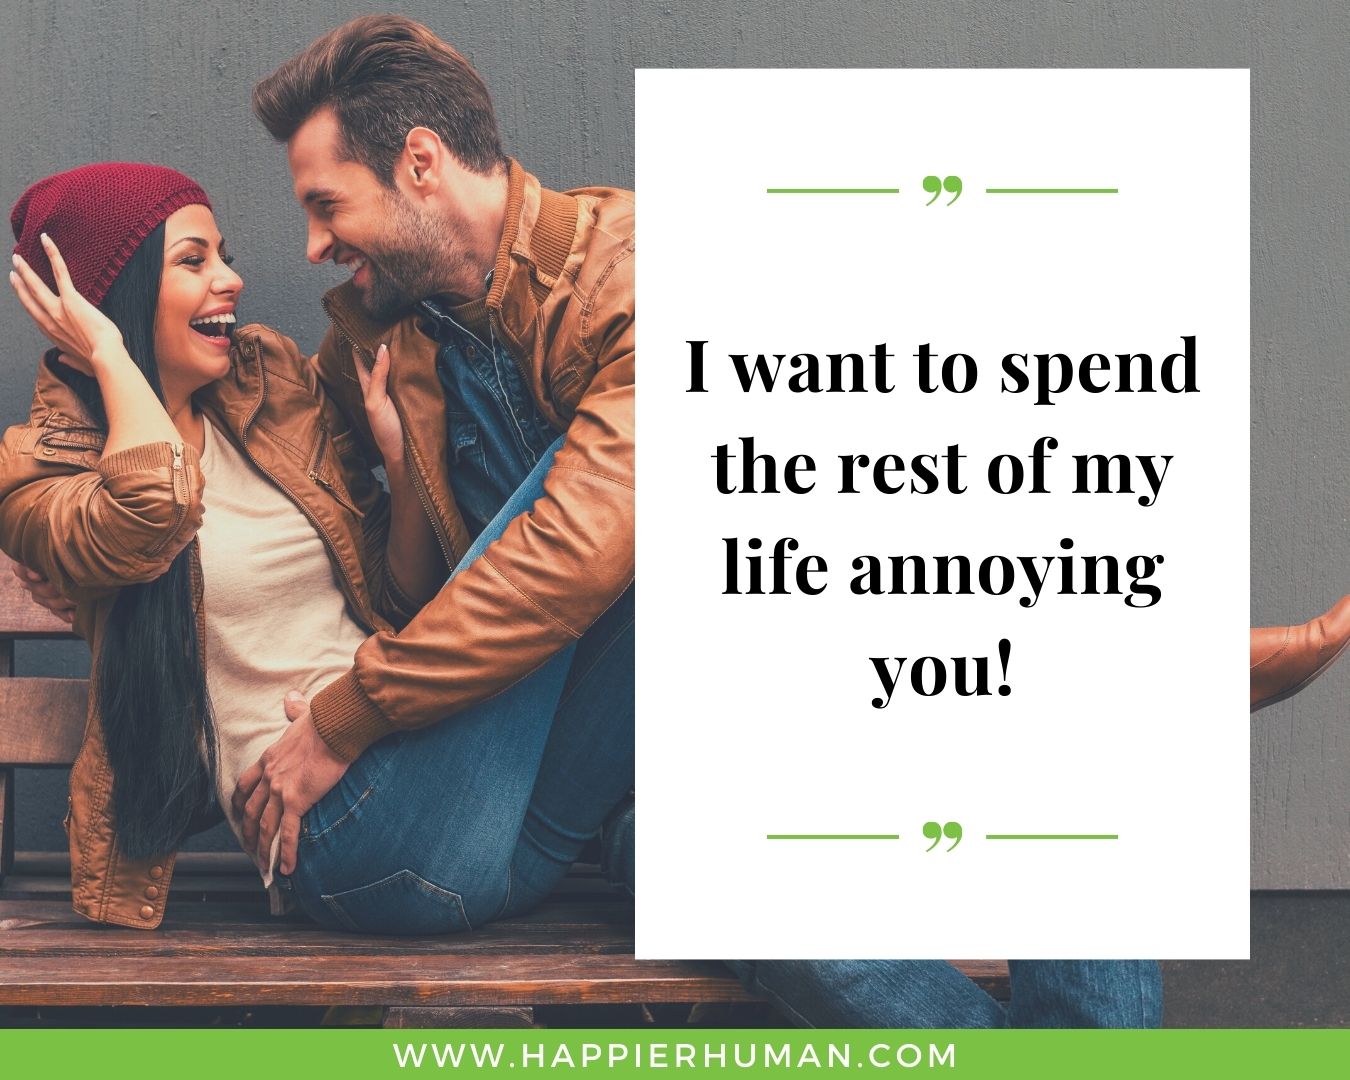 Short Love Quotes for Her - “I want to spend the rest of my life annoying you!”